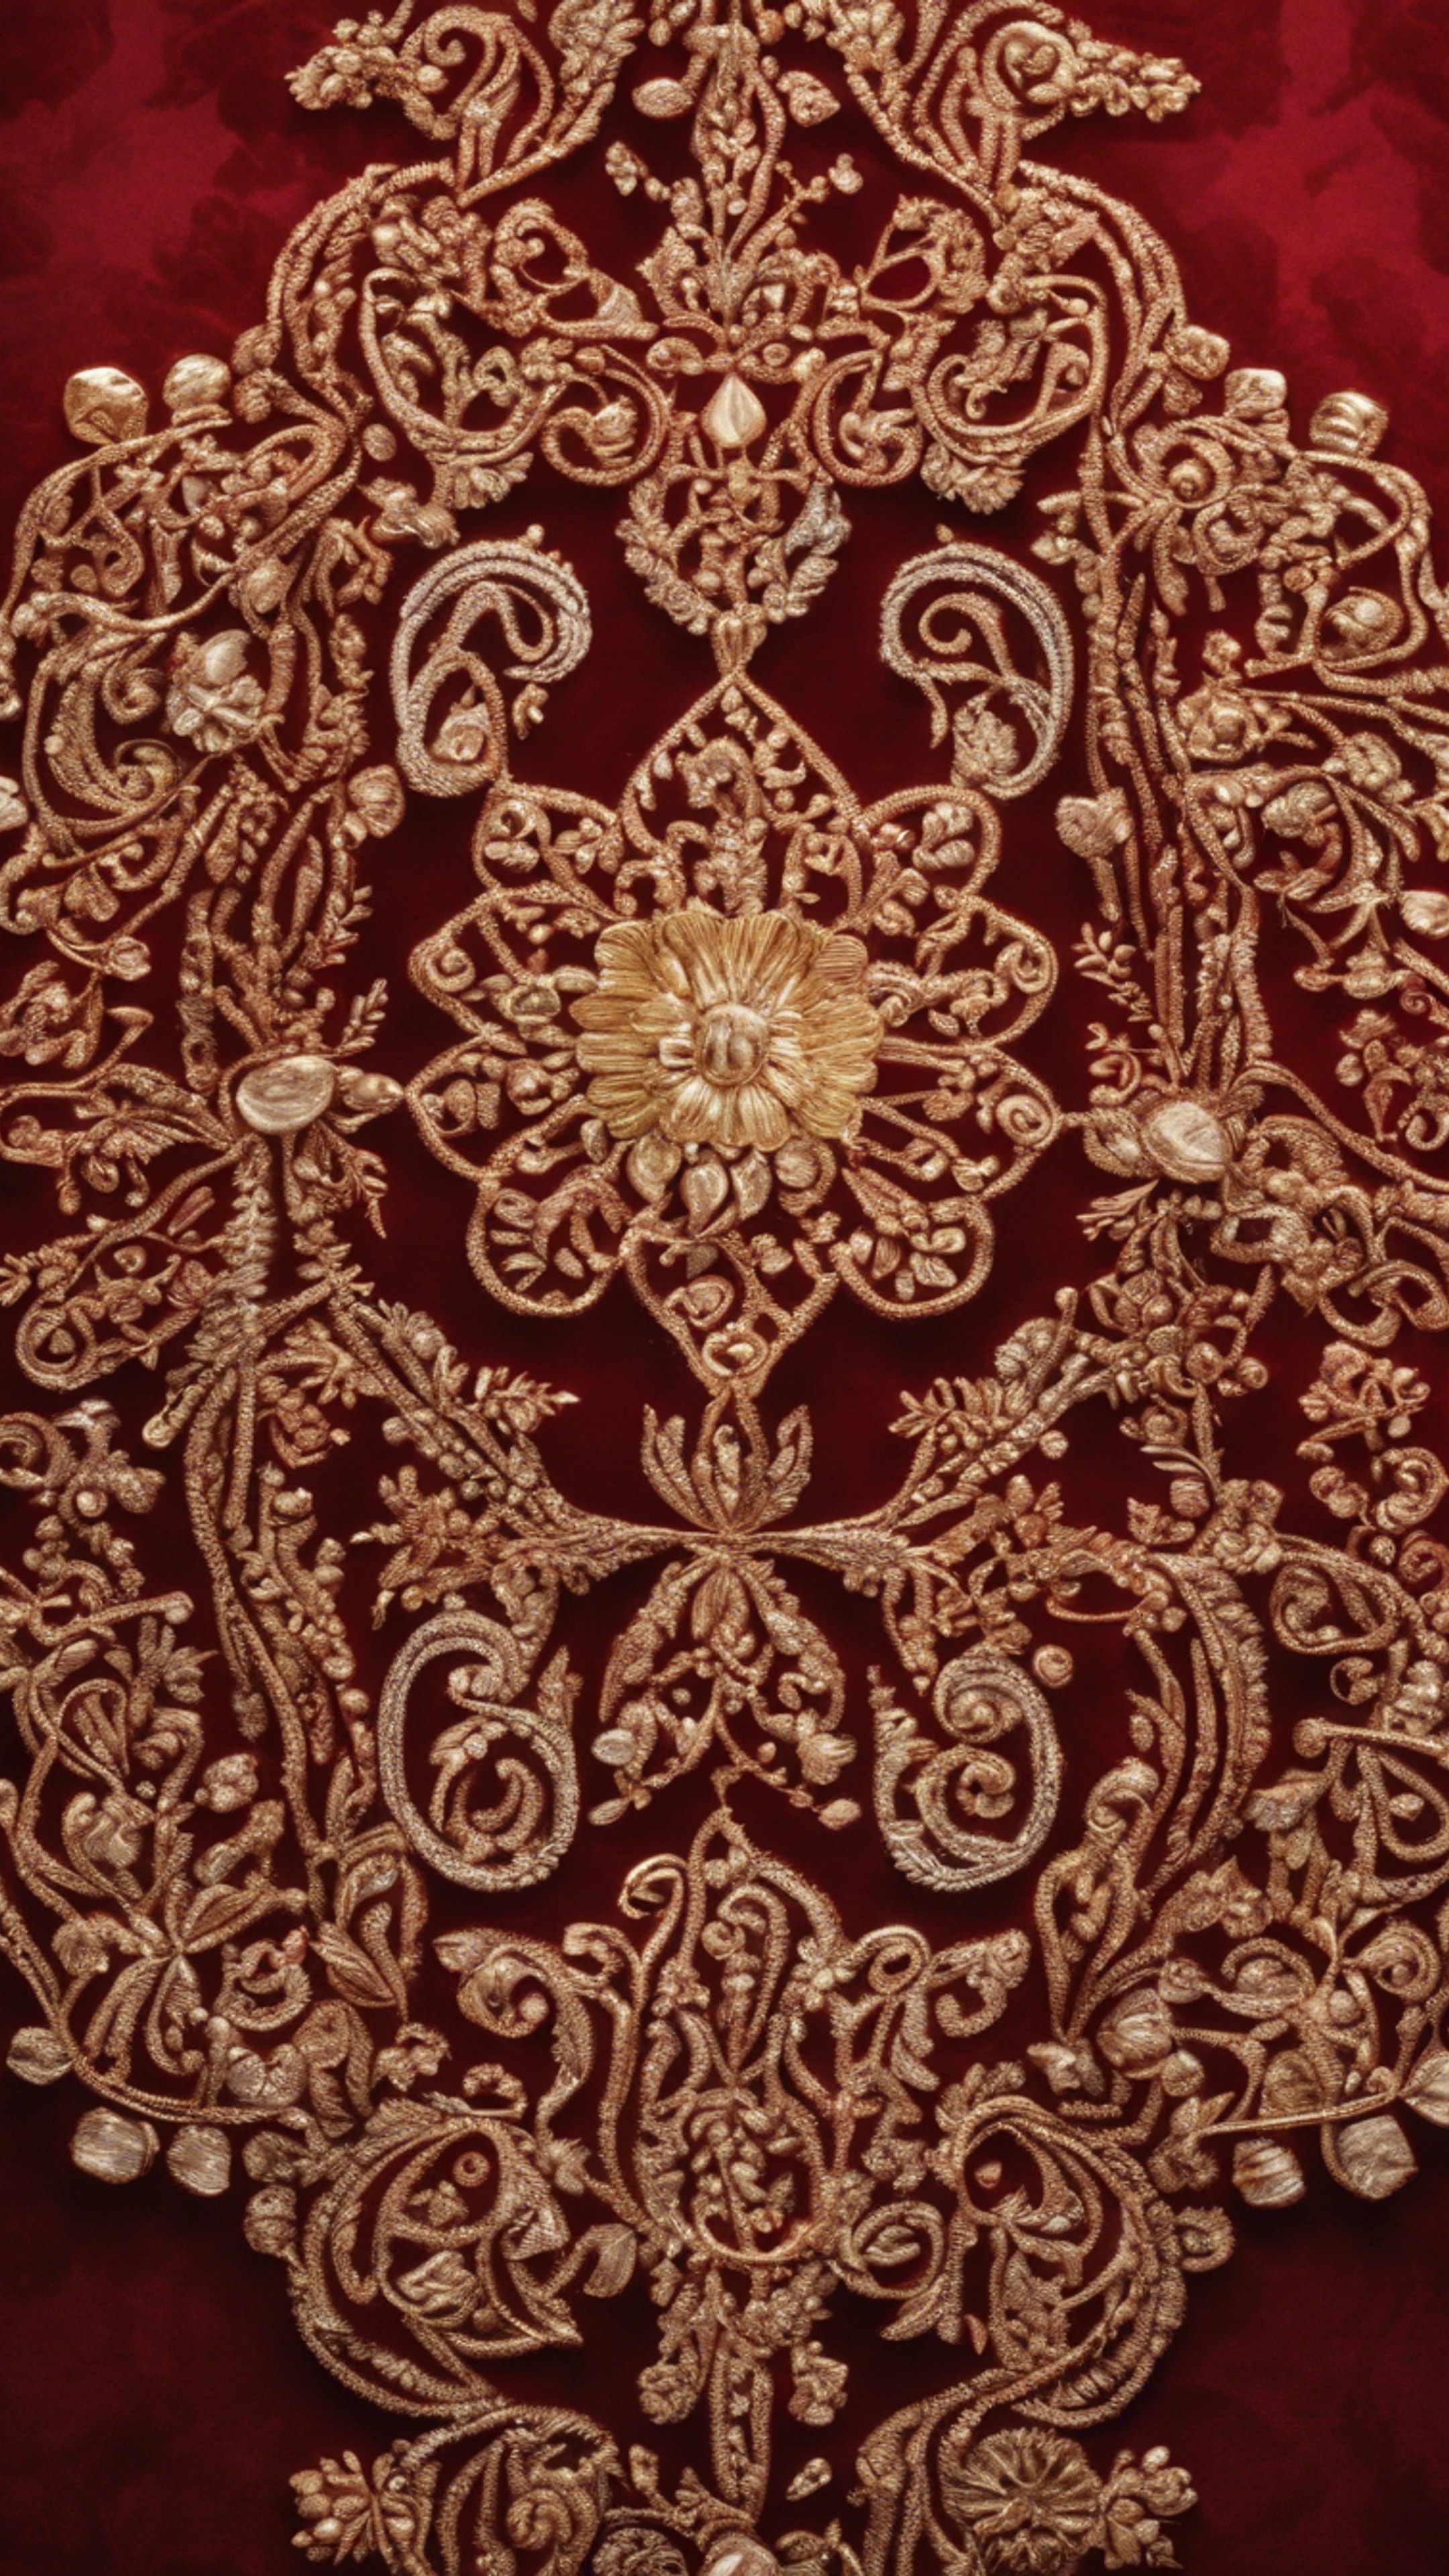 A mesmerizing design of intricate gold embroidery adorned over fiery red velvet. Wallpaper[a17599ee07084b7c979d]